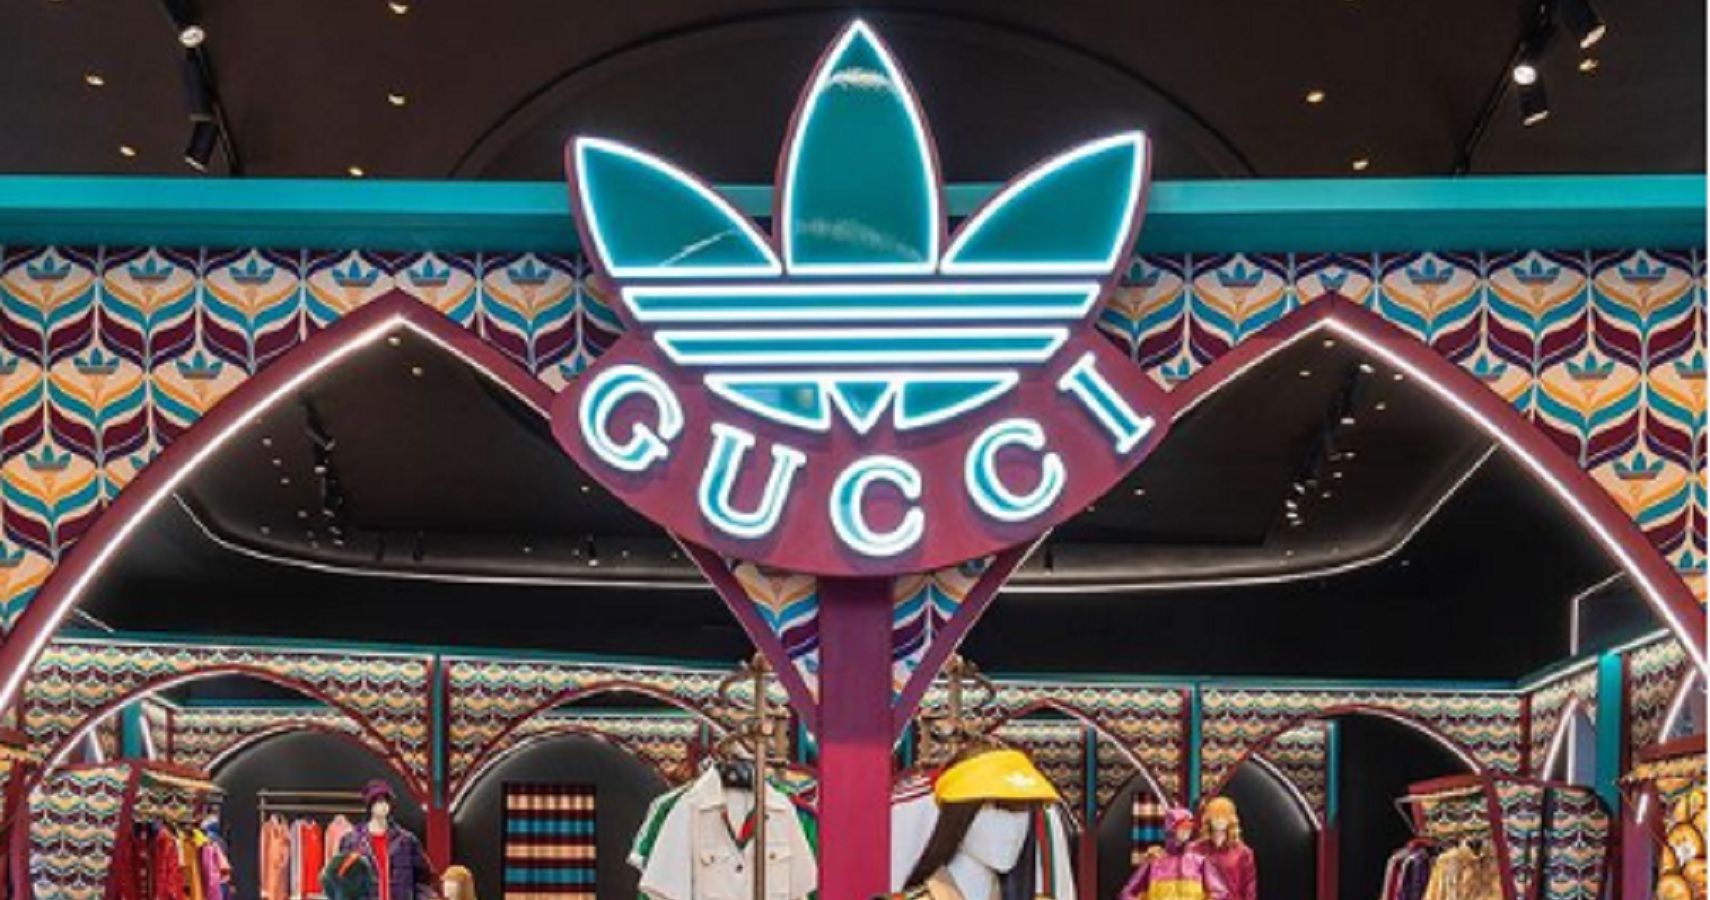 Top 10 Most Expensive Gucci Products in the World